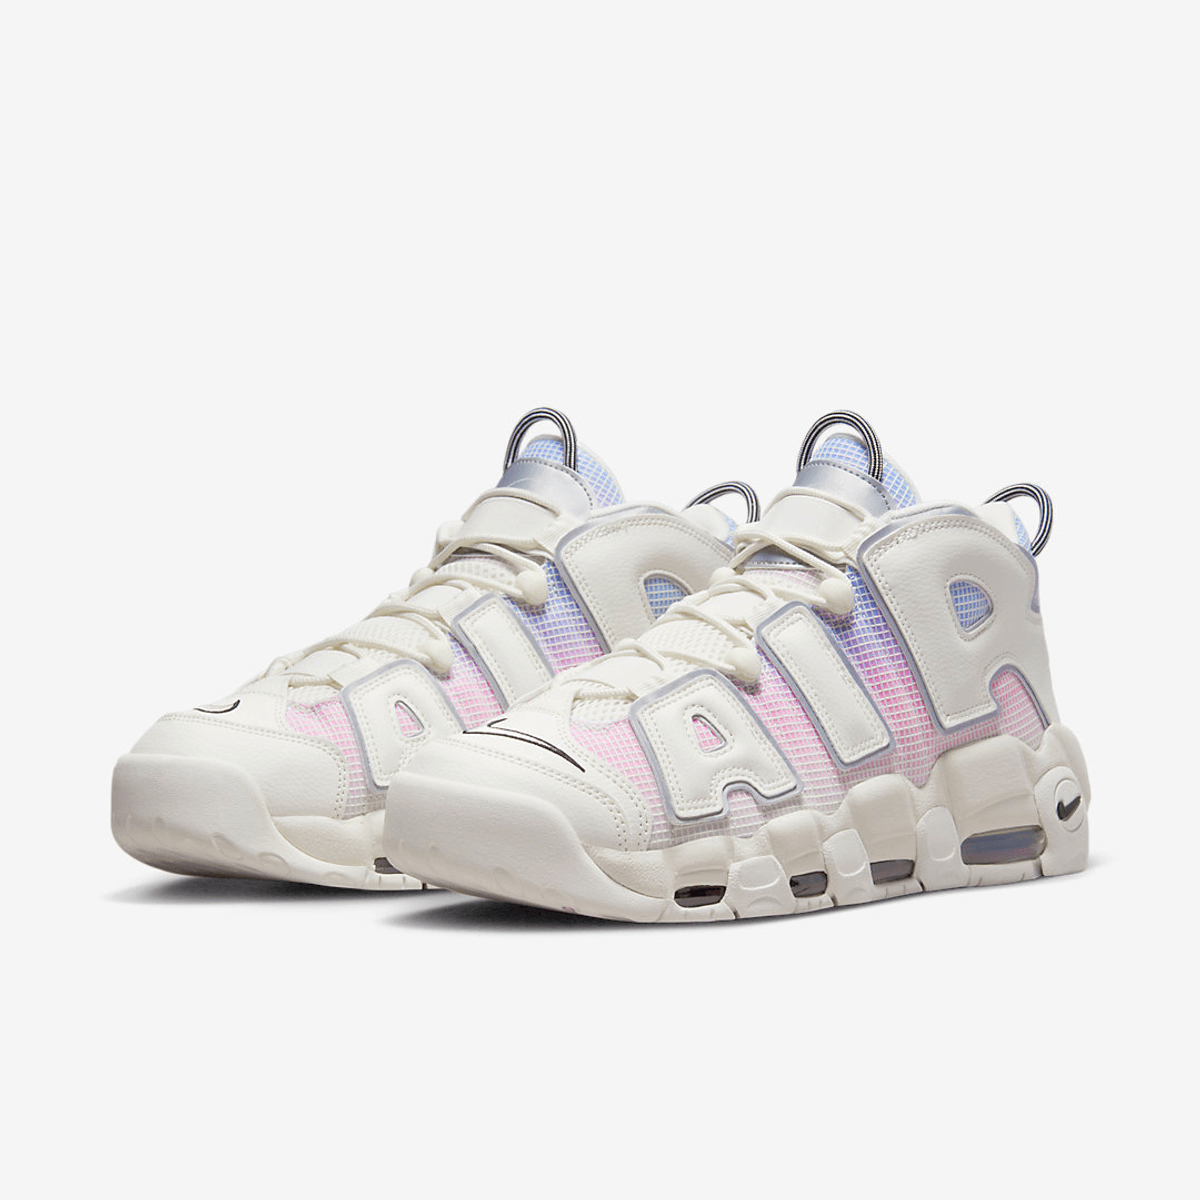 The Nike Air More Uptempo ’96 Thank You Wilson Pays Its Respect To The Industry’s First Black Designer